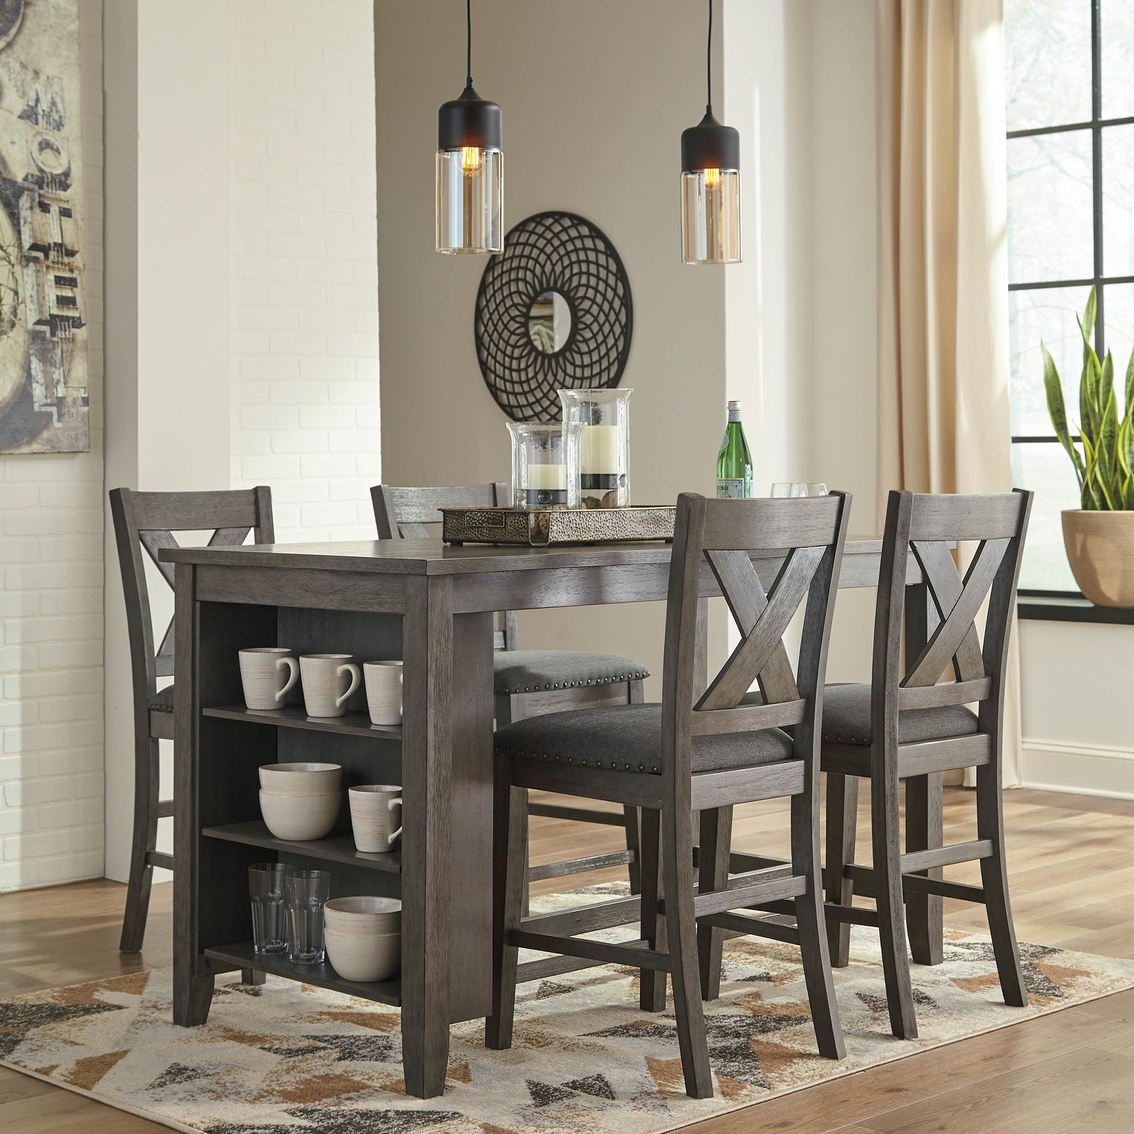 Signature Design by Ashley Caitbrook Counter Table Set with 4 High Back Stools - Image 2 of 4